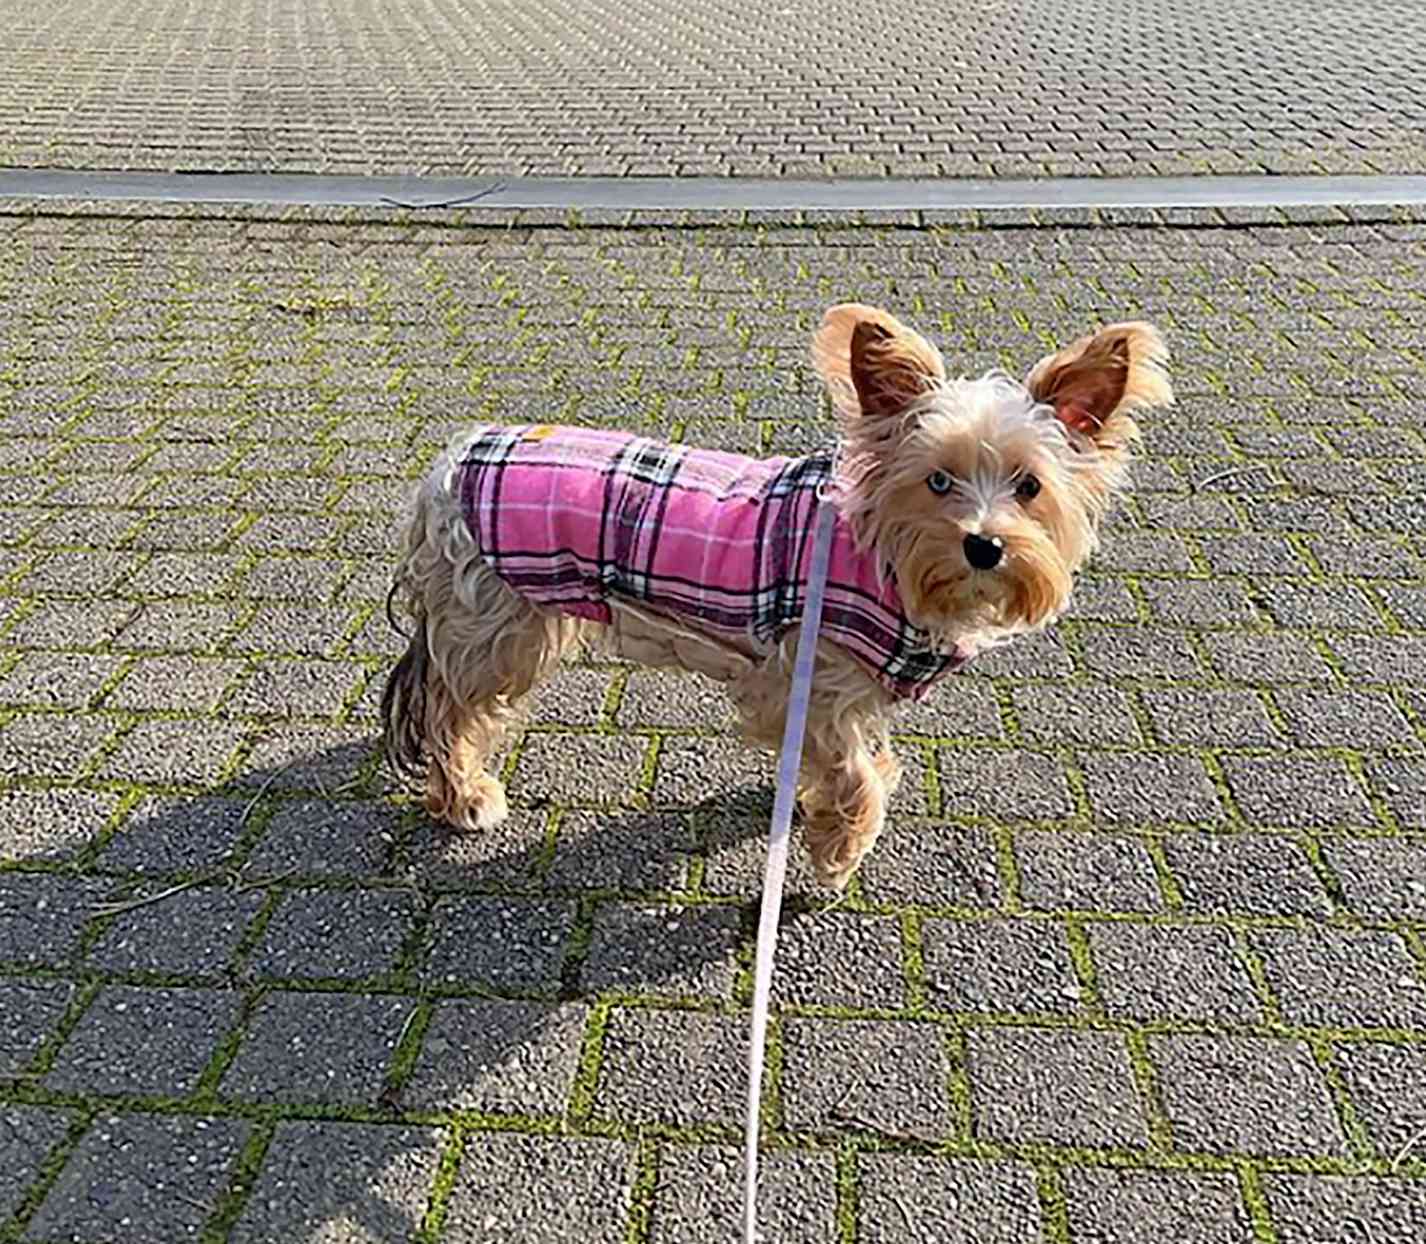 tan dorkie dog in a pink jacket and harness